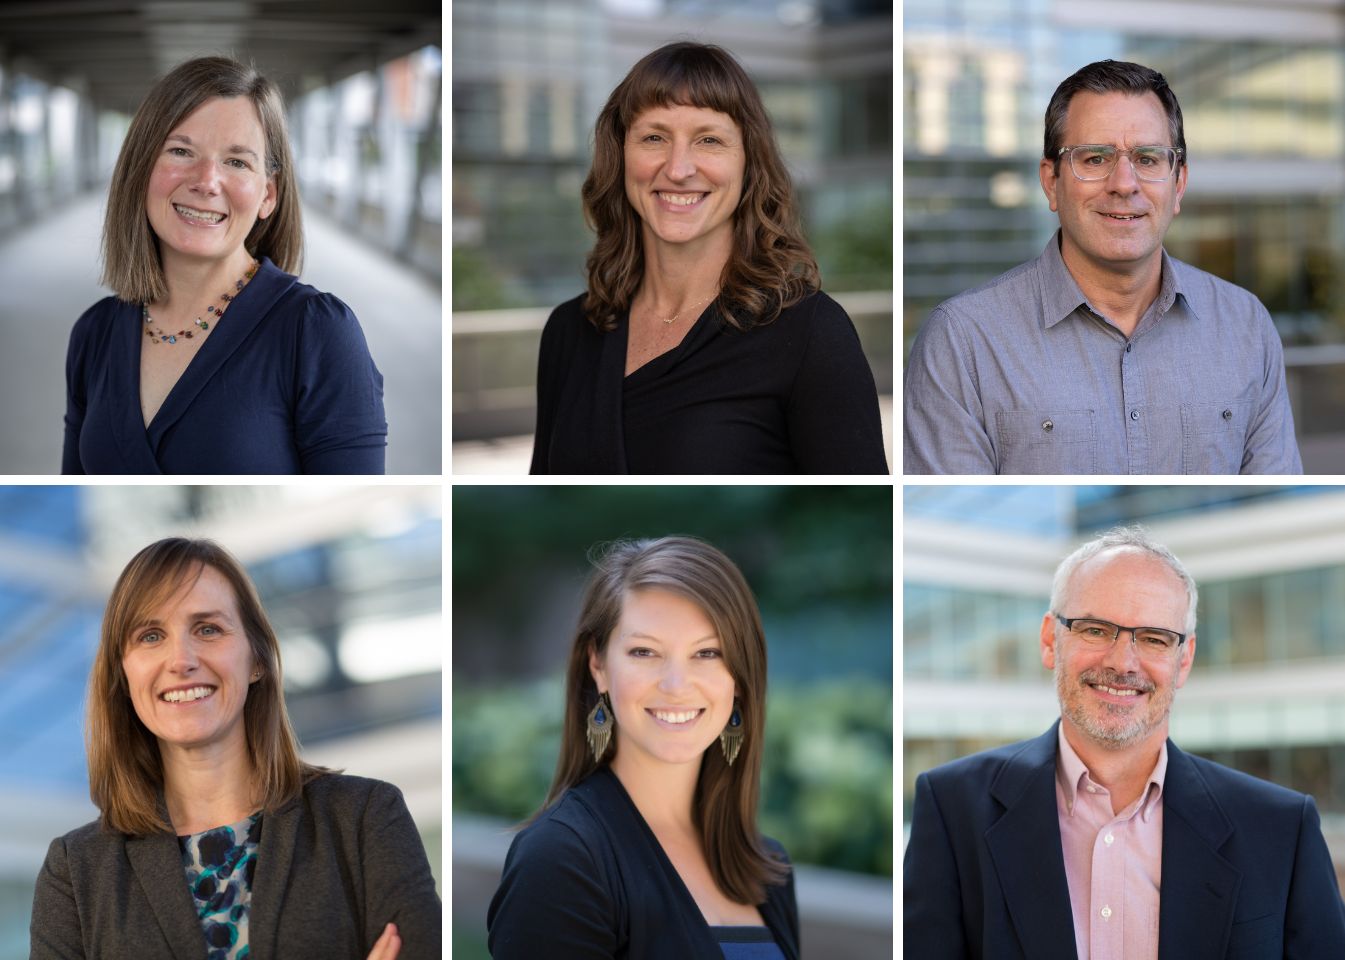 Top row, from left: Drs. Katherine Reeder-Hayes, Jenny Lund and Christopher Baggett; bottom row, from left: Drs. Louise Henderson, Stephanie Wheeler and Dan Reuland